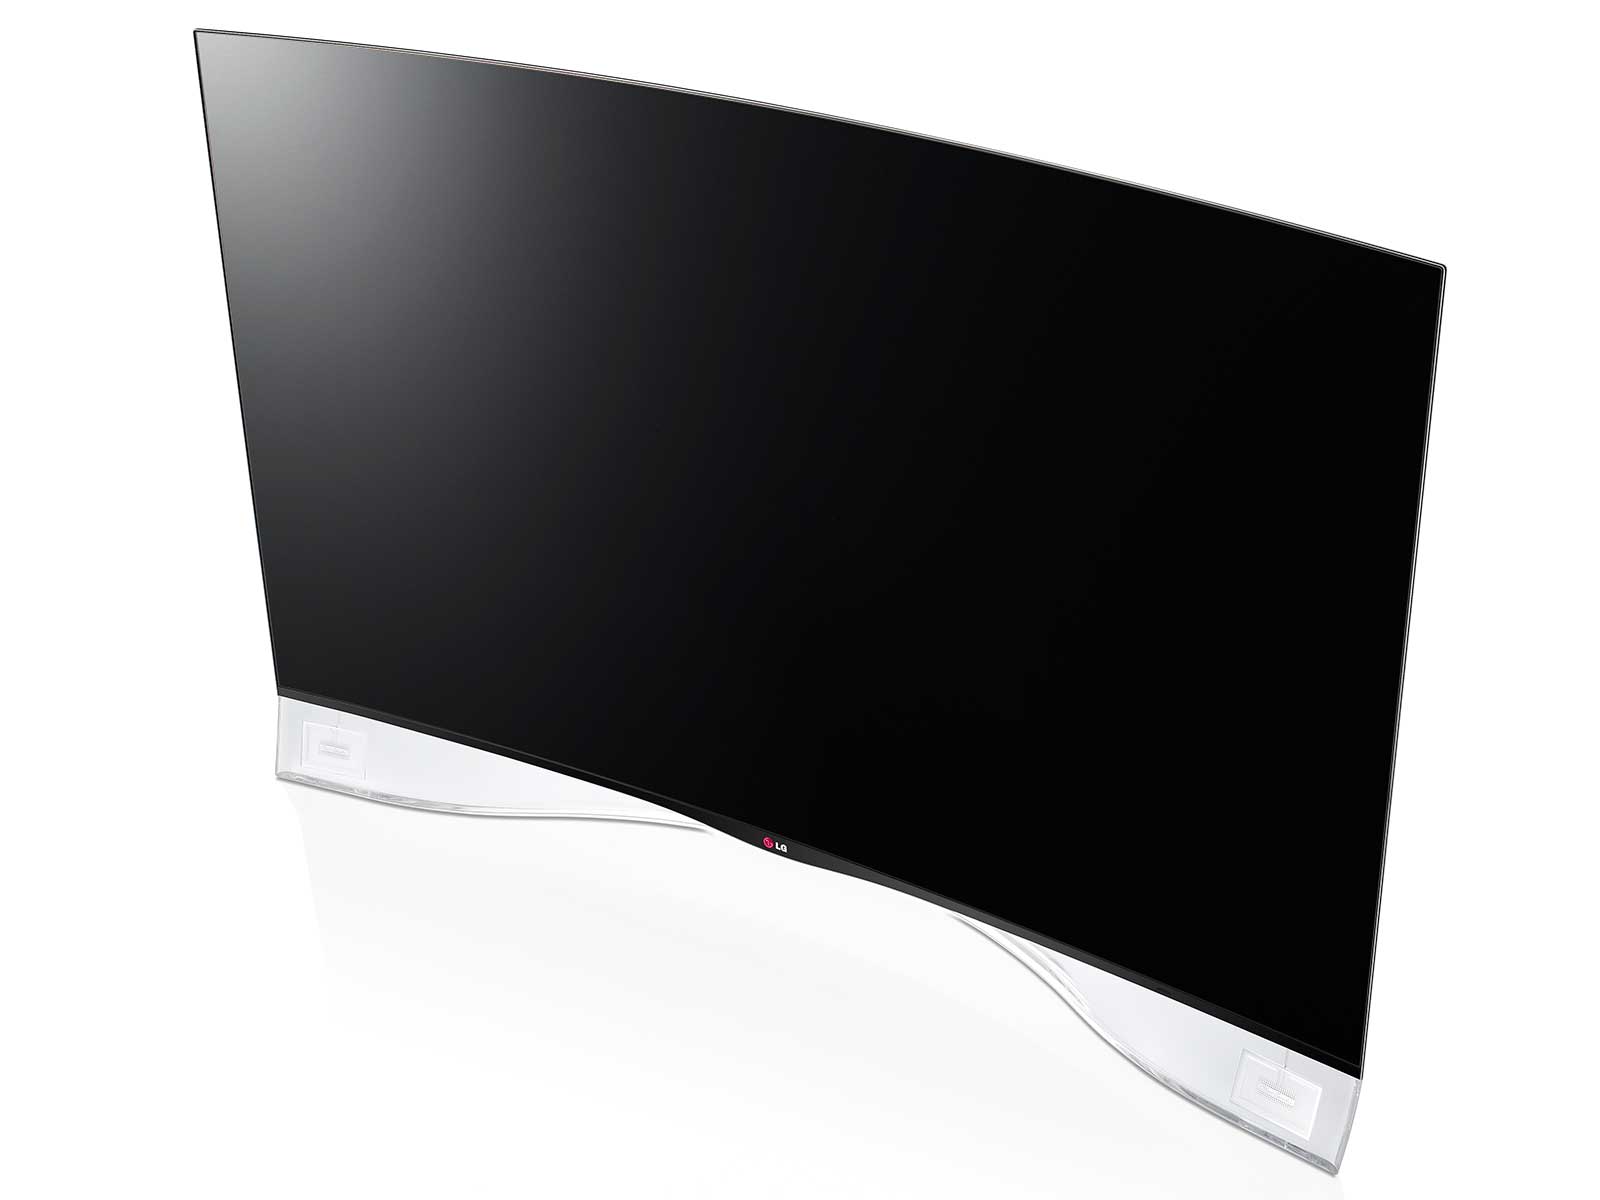 Grand delusion chemicals Advance LG committed to OLED, 4K and WebOS at 2014 home entertainment launch -  Appliance Retailer